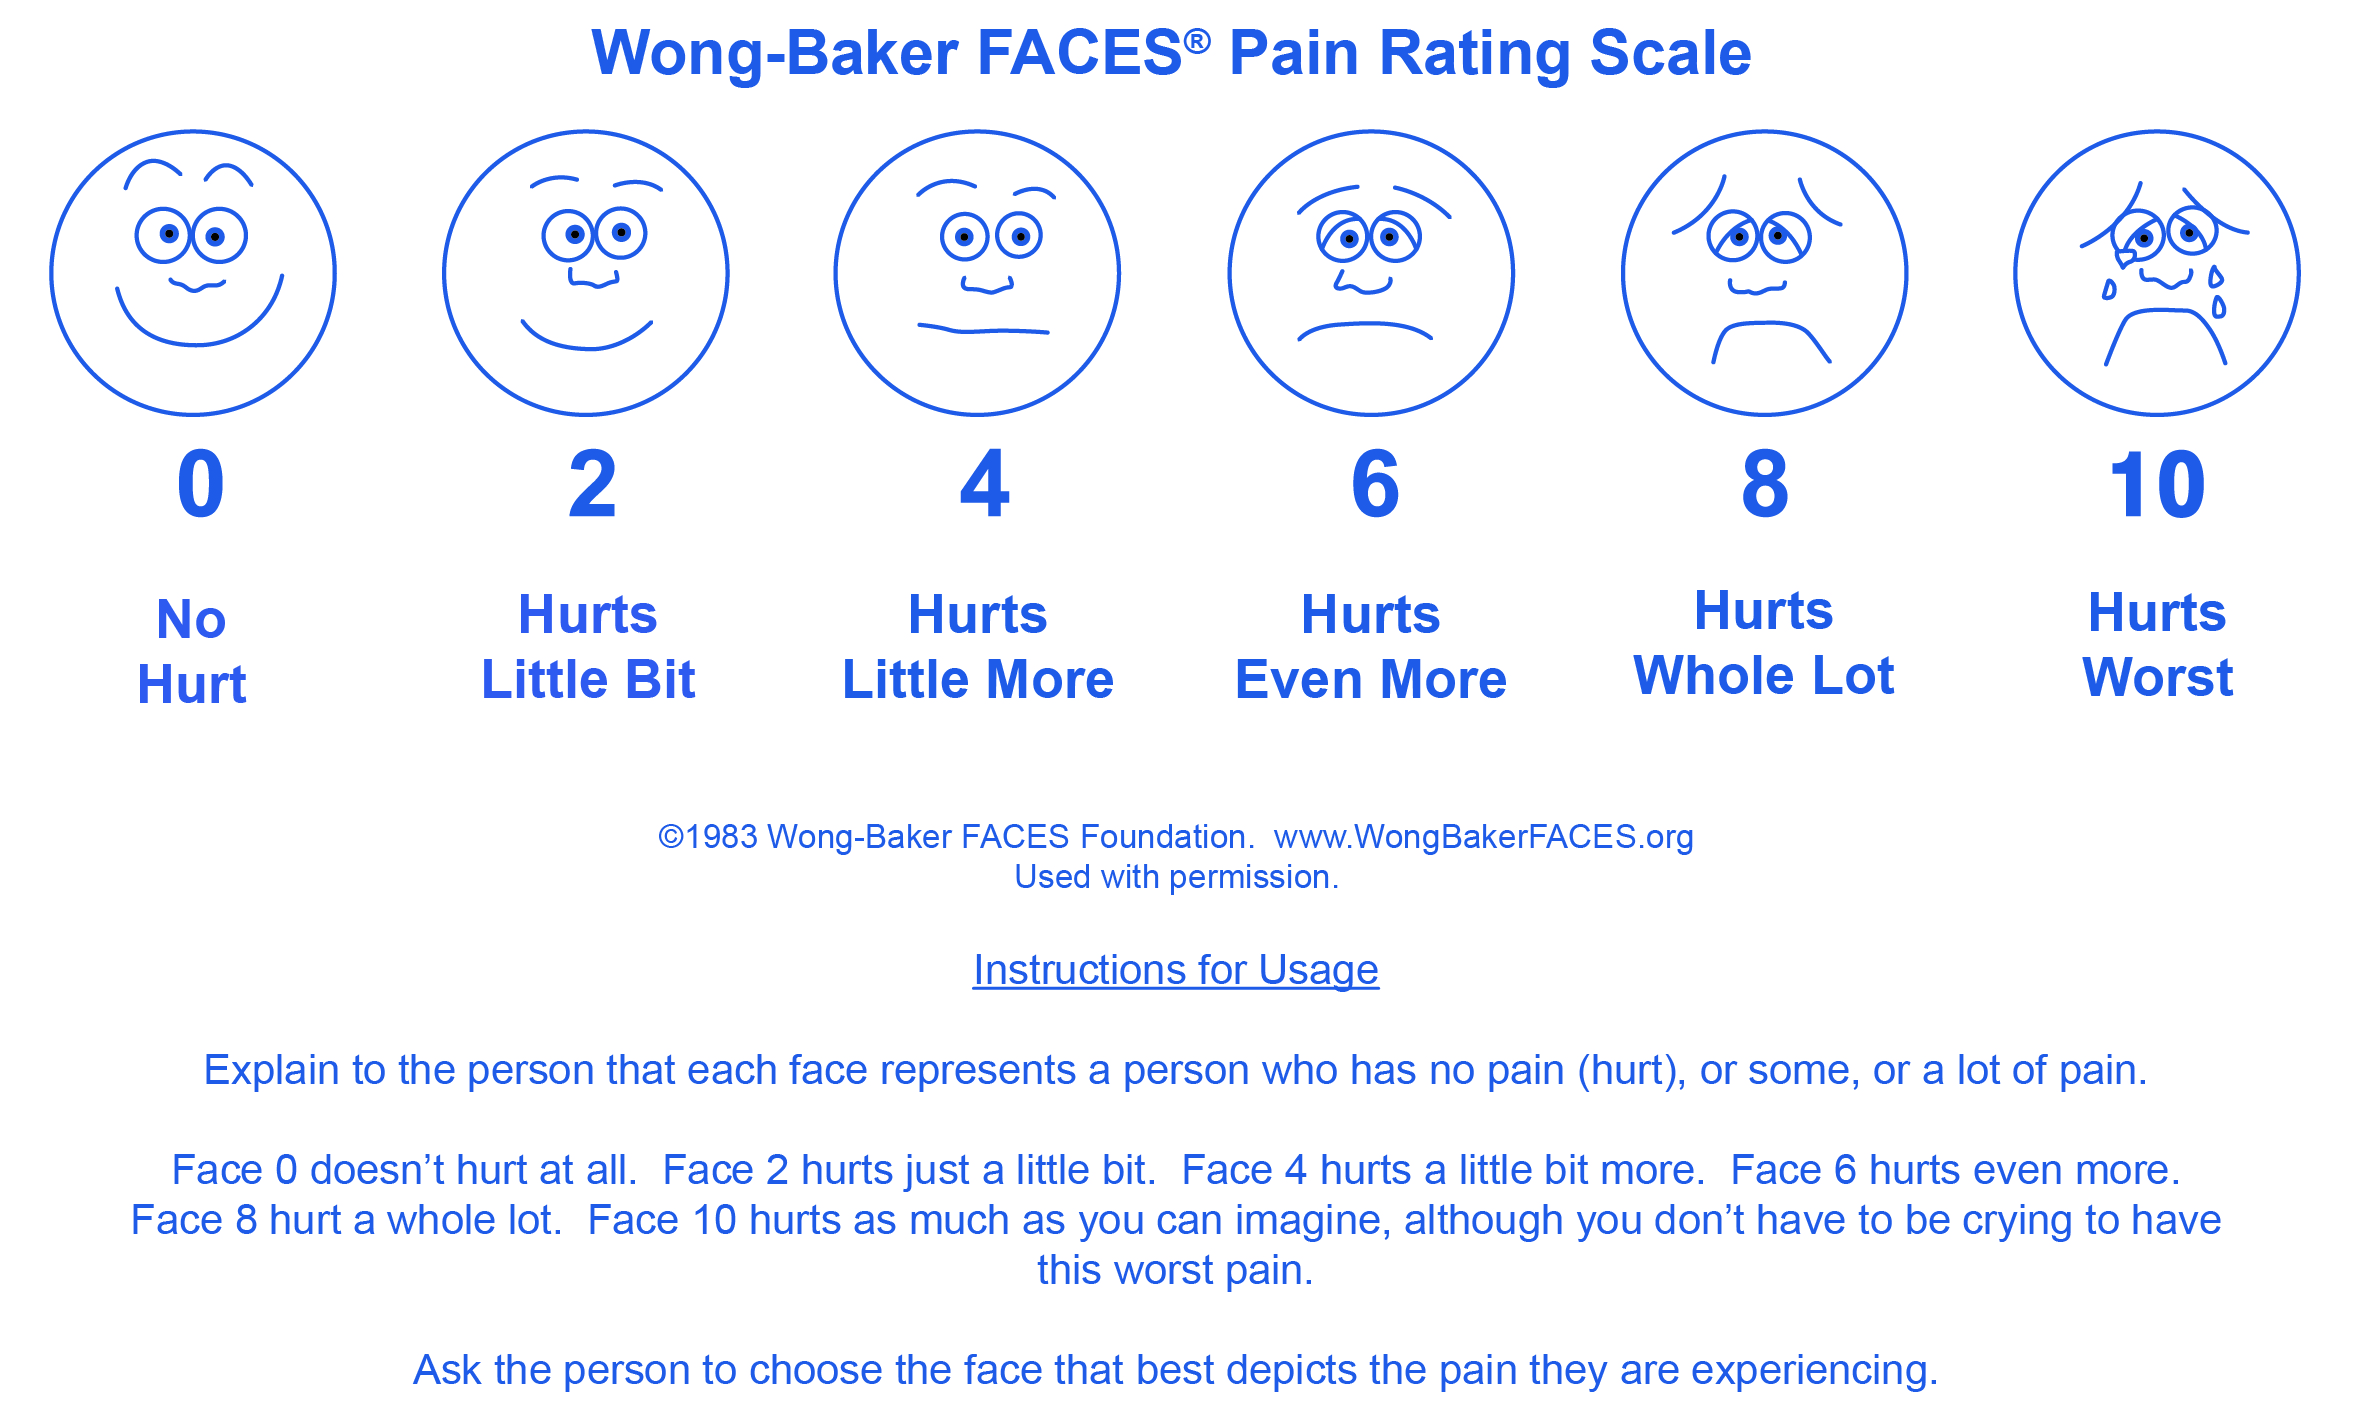 instructions-for-use-wong-baker-faces-foundation